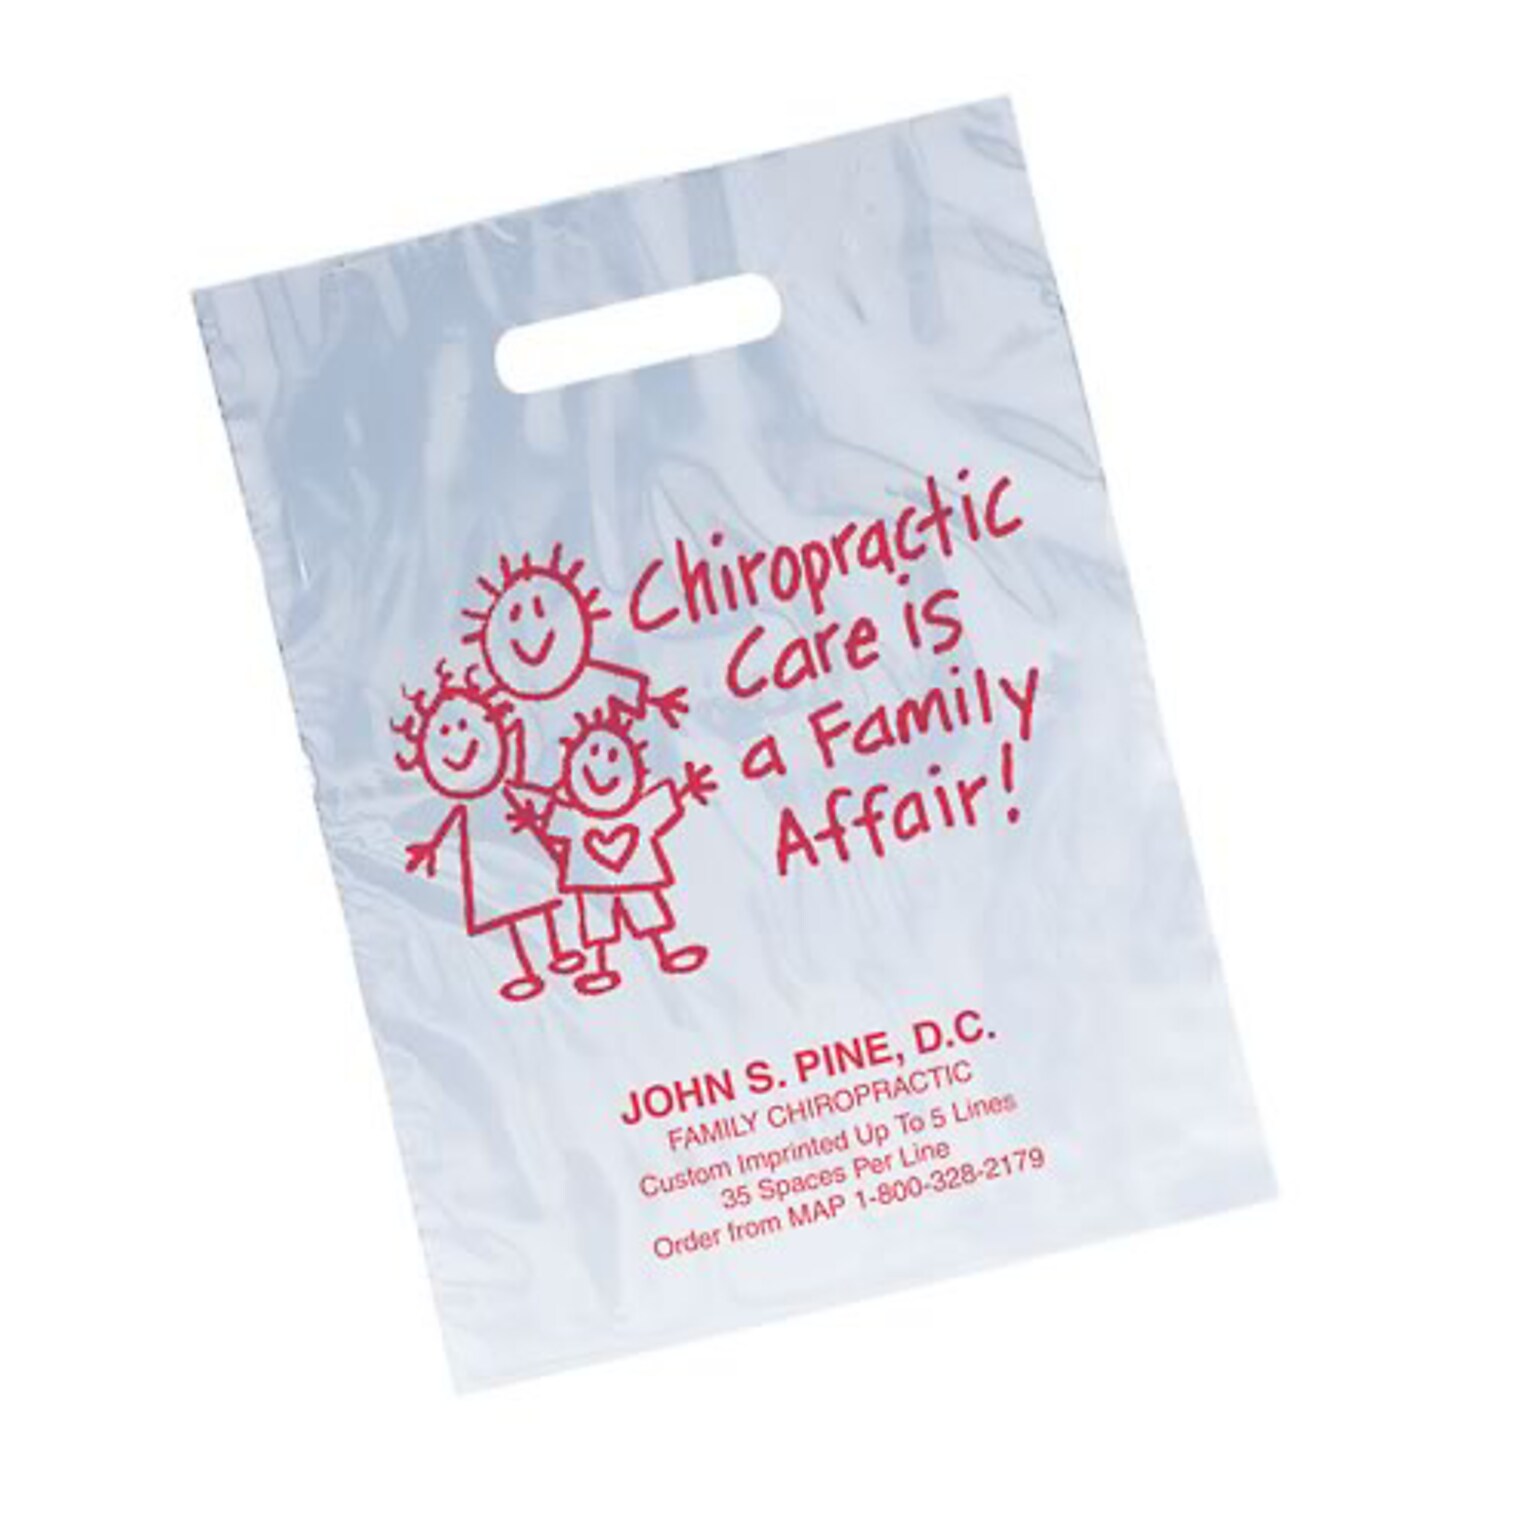 Medical Arts Press® Chiropractic Personalized 1-Color Supply Bags; 9 x 13, Chiro Care Is, 100 Bags, (560481)